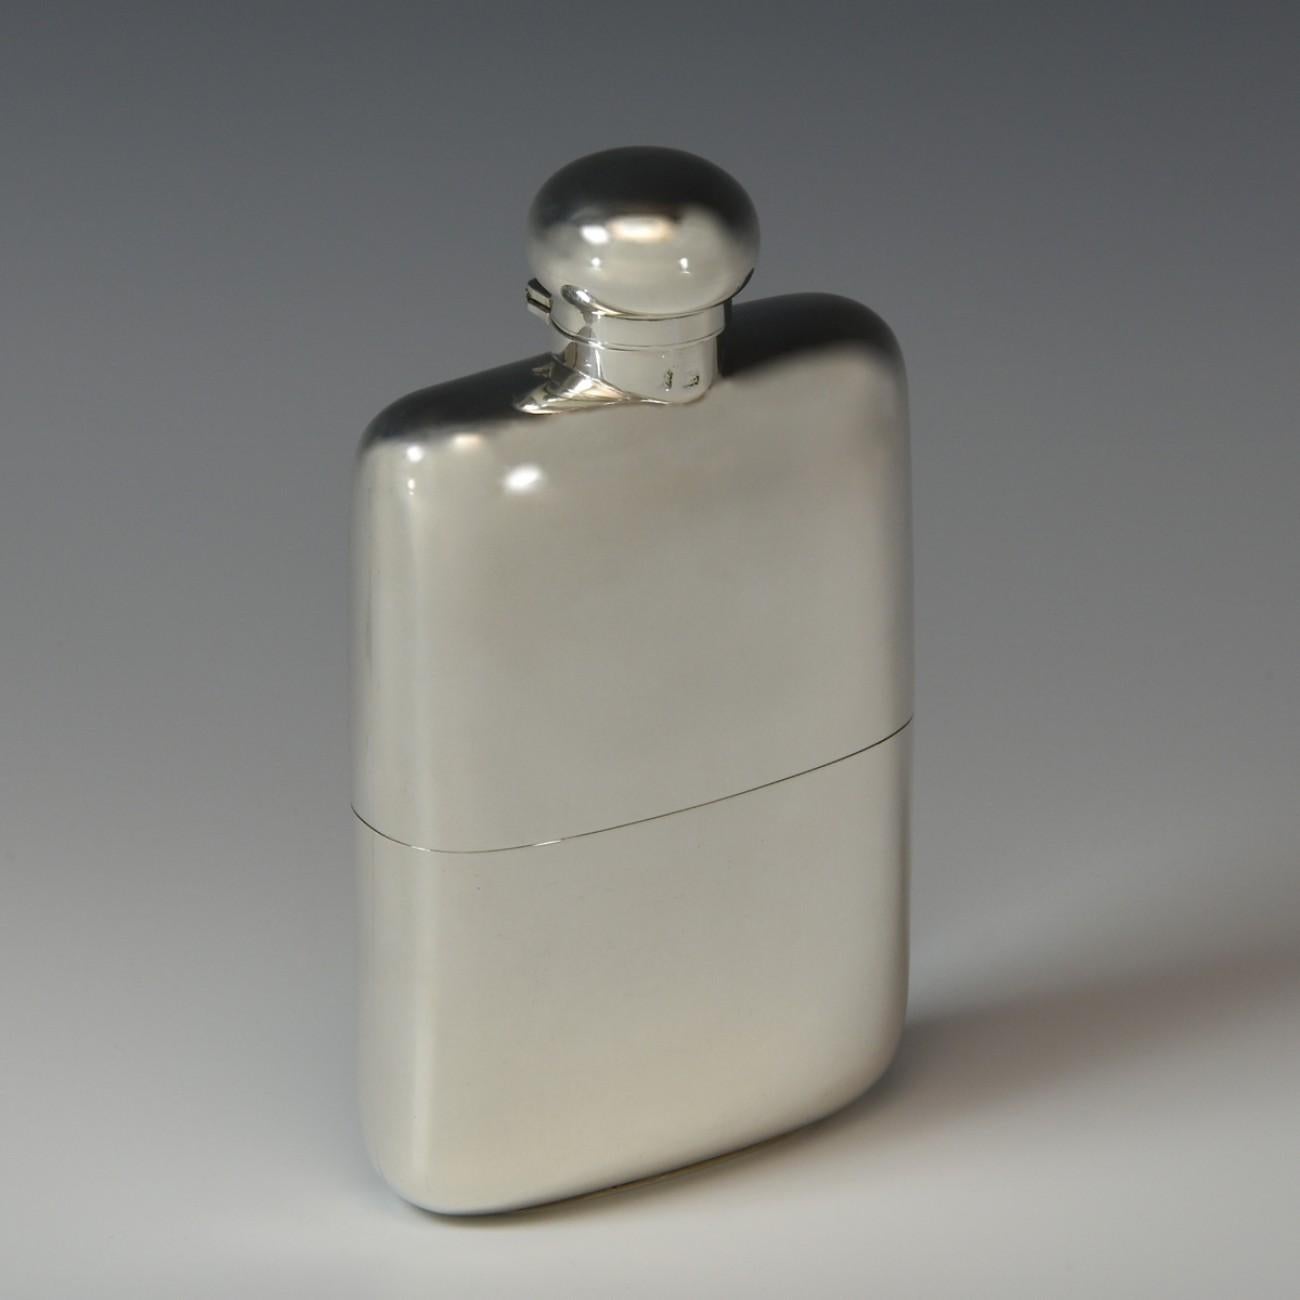 An excellent solid Sterling silver hip flask, hallmarked London 1907. The silver body of the flask and it is topped with a cork lined stopper that is on a hinged bayonet closer. The silver section covering the bottom of the flask slides off to form